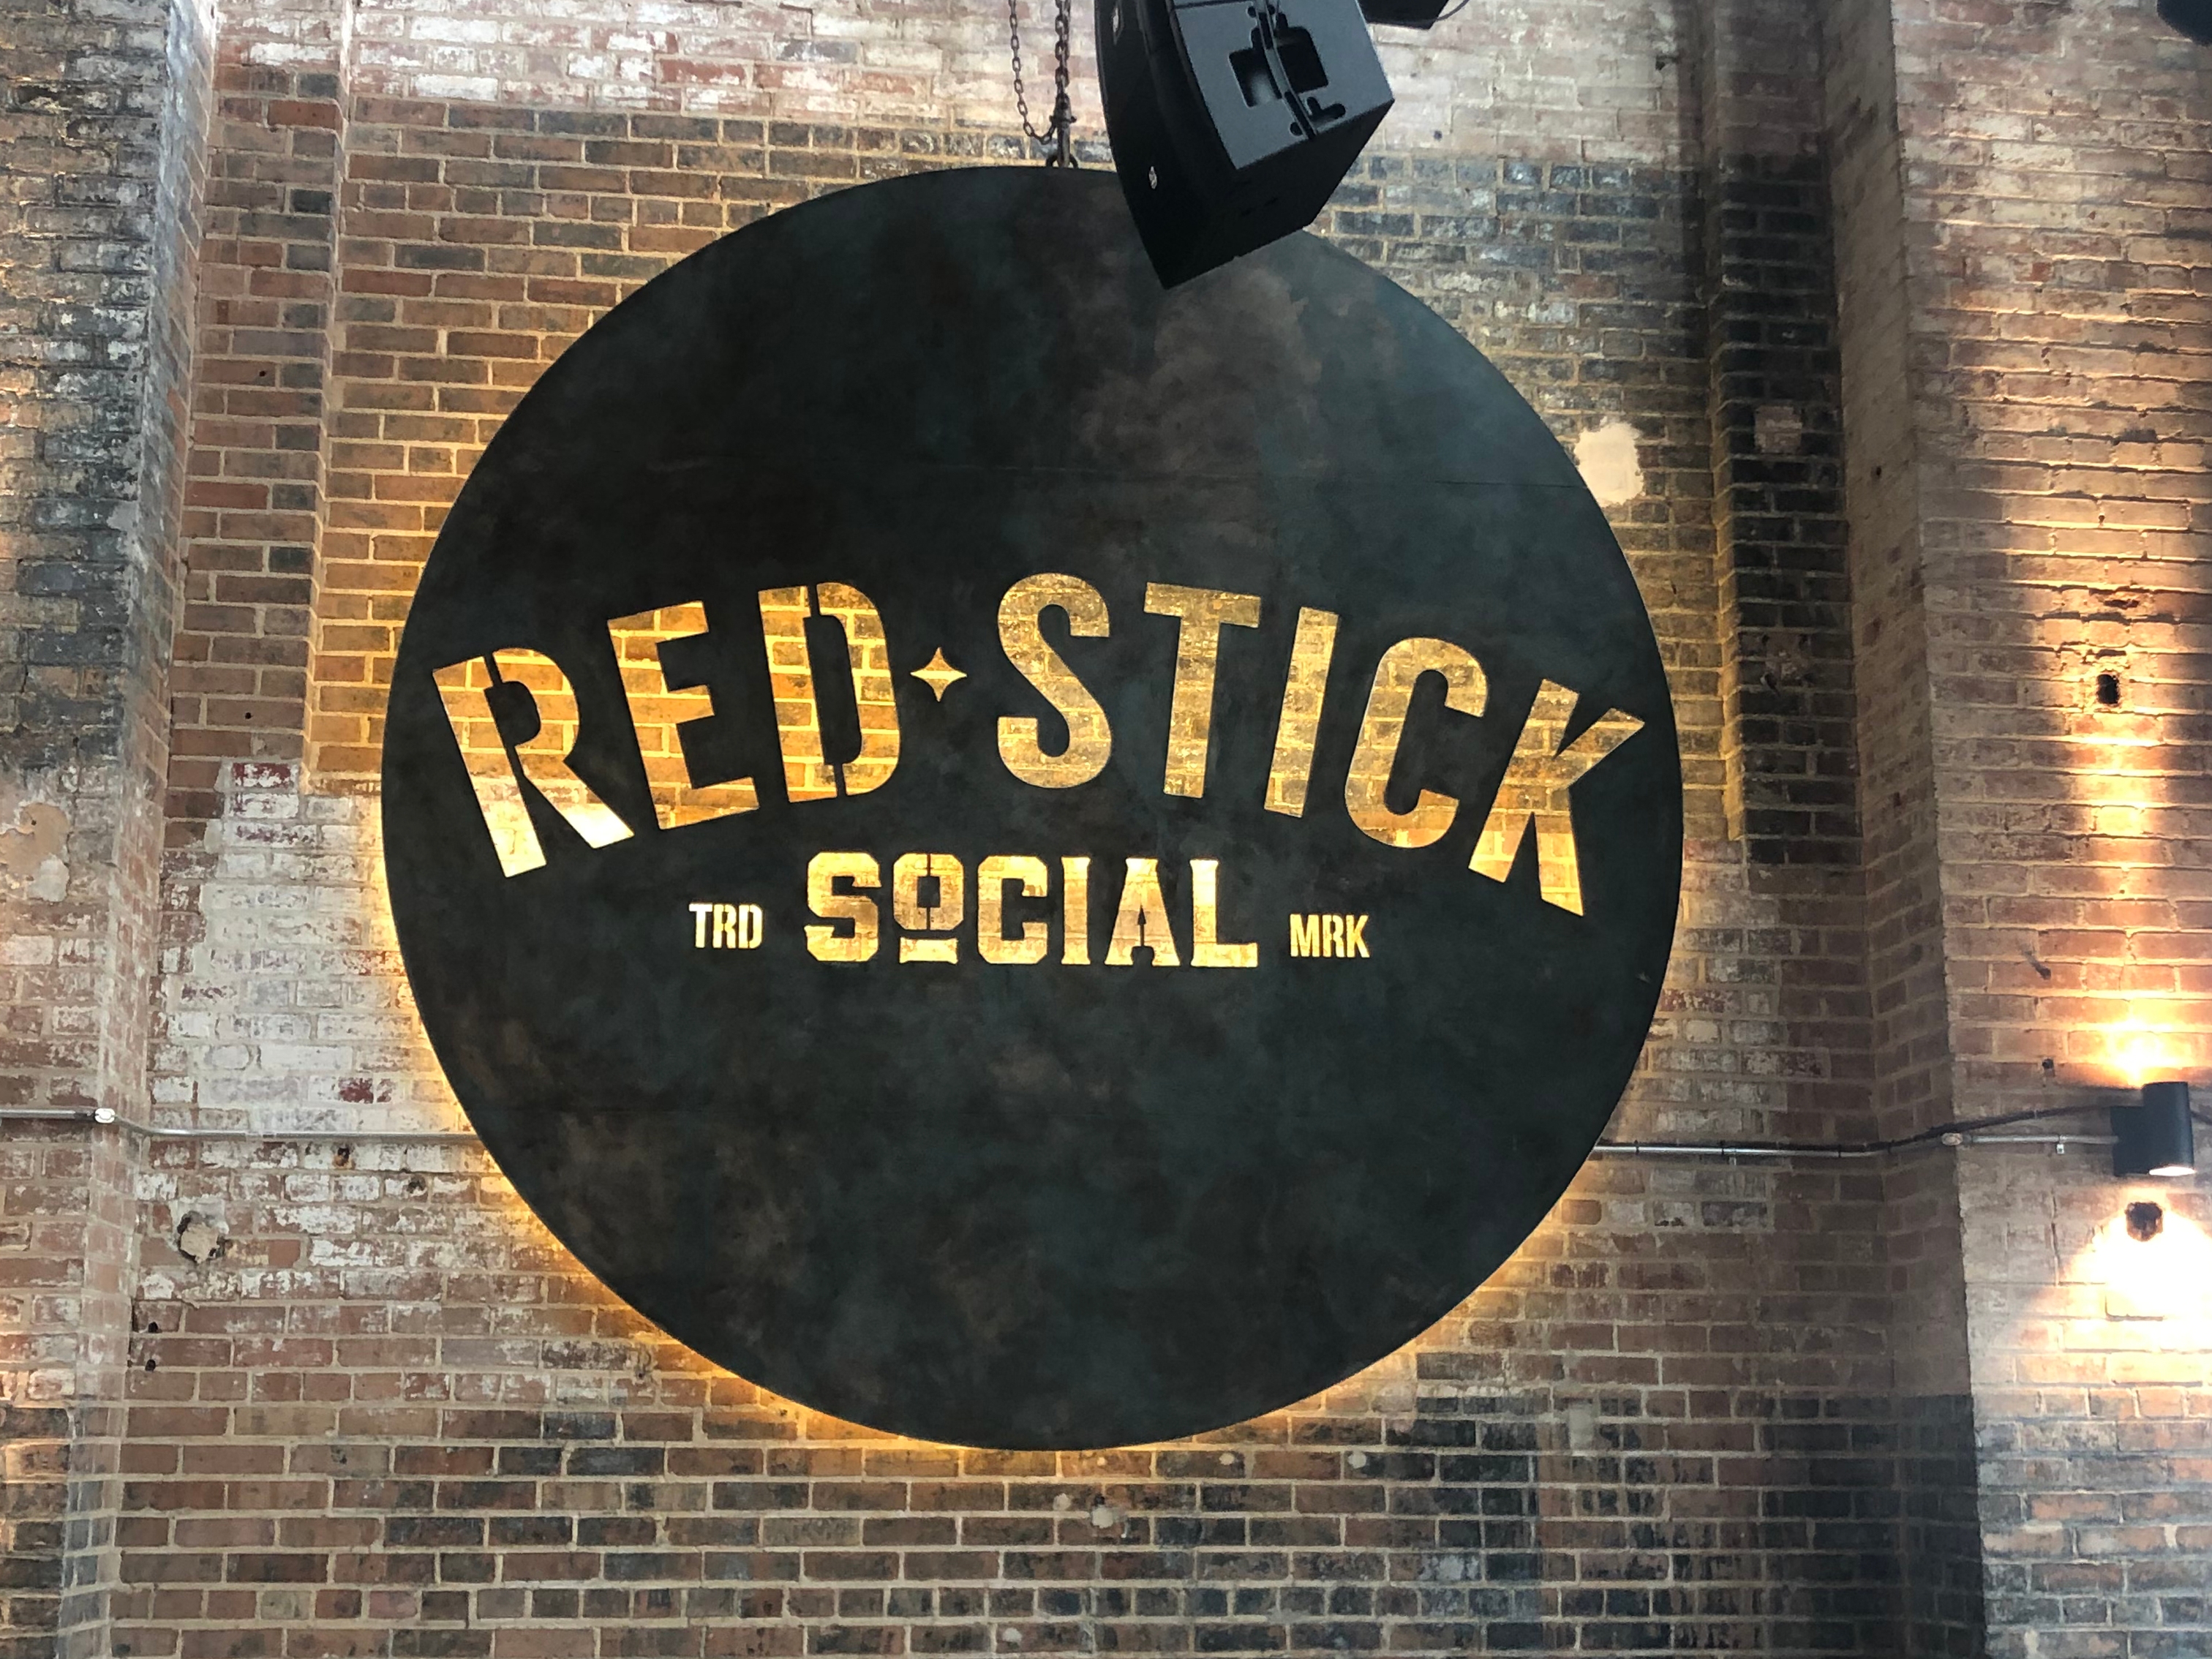 Backlash from ambiguous dress code prompts apology from Red Stick Social